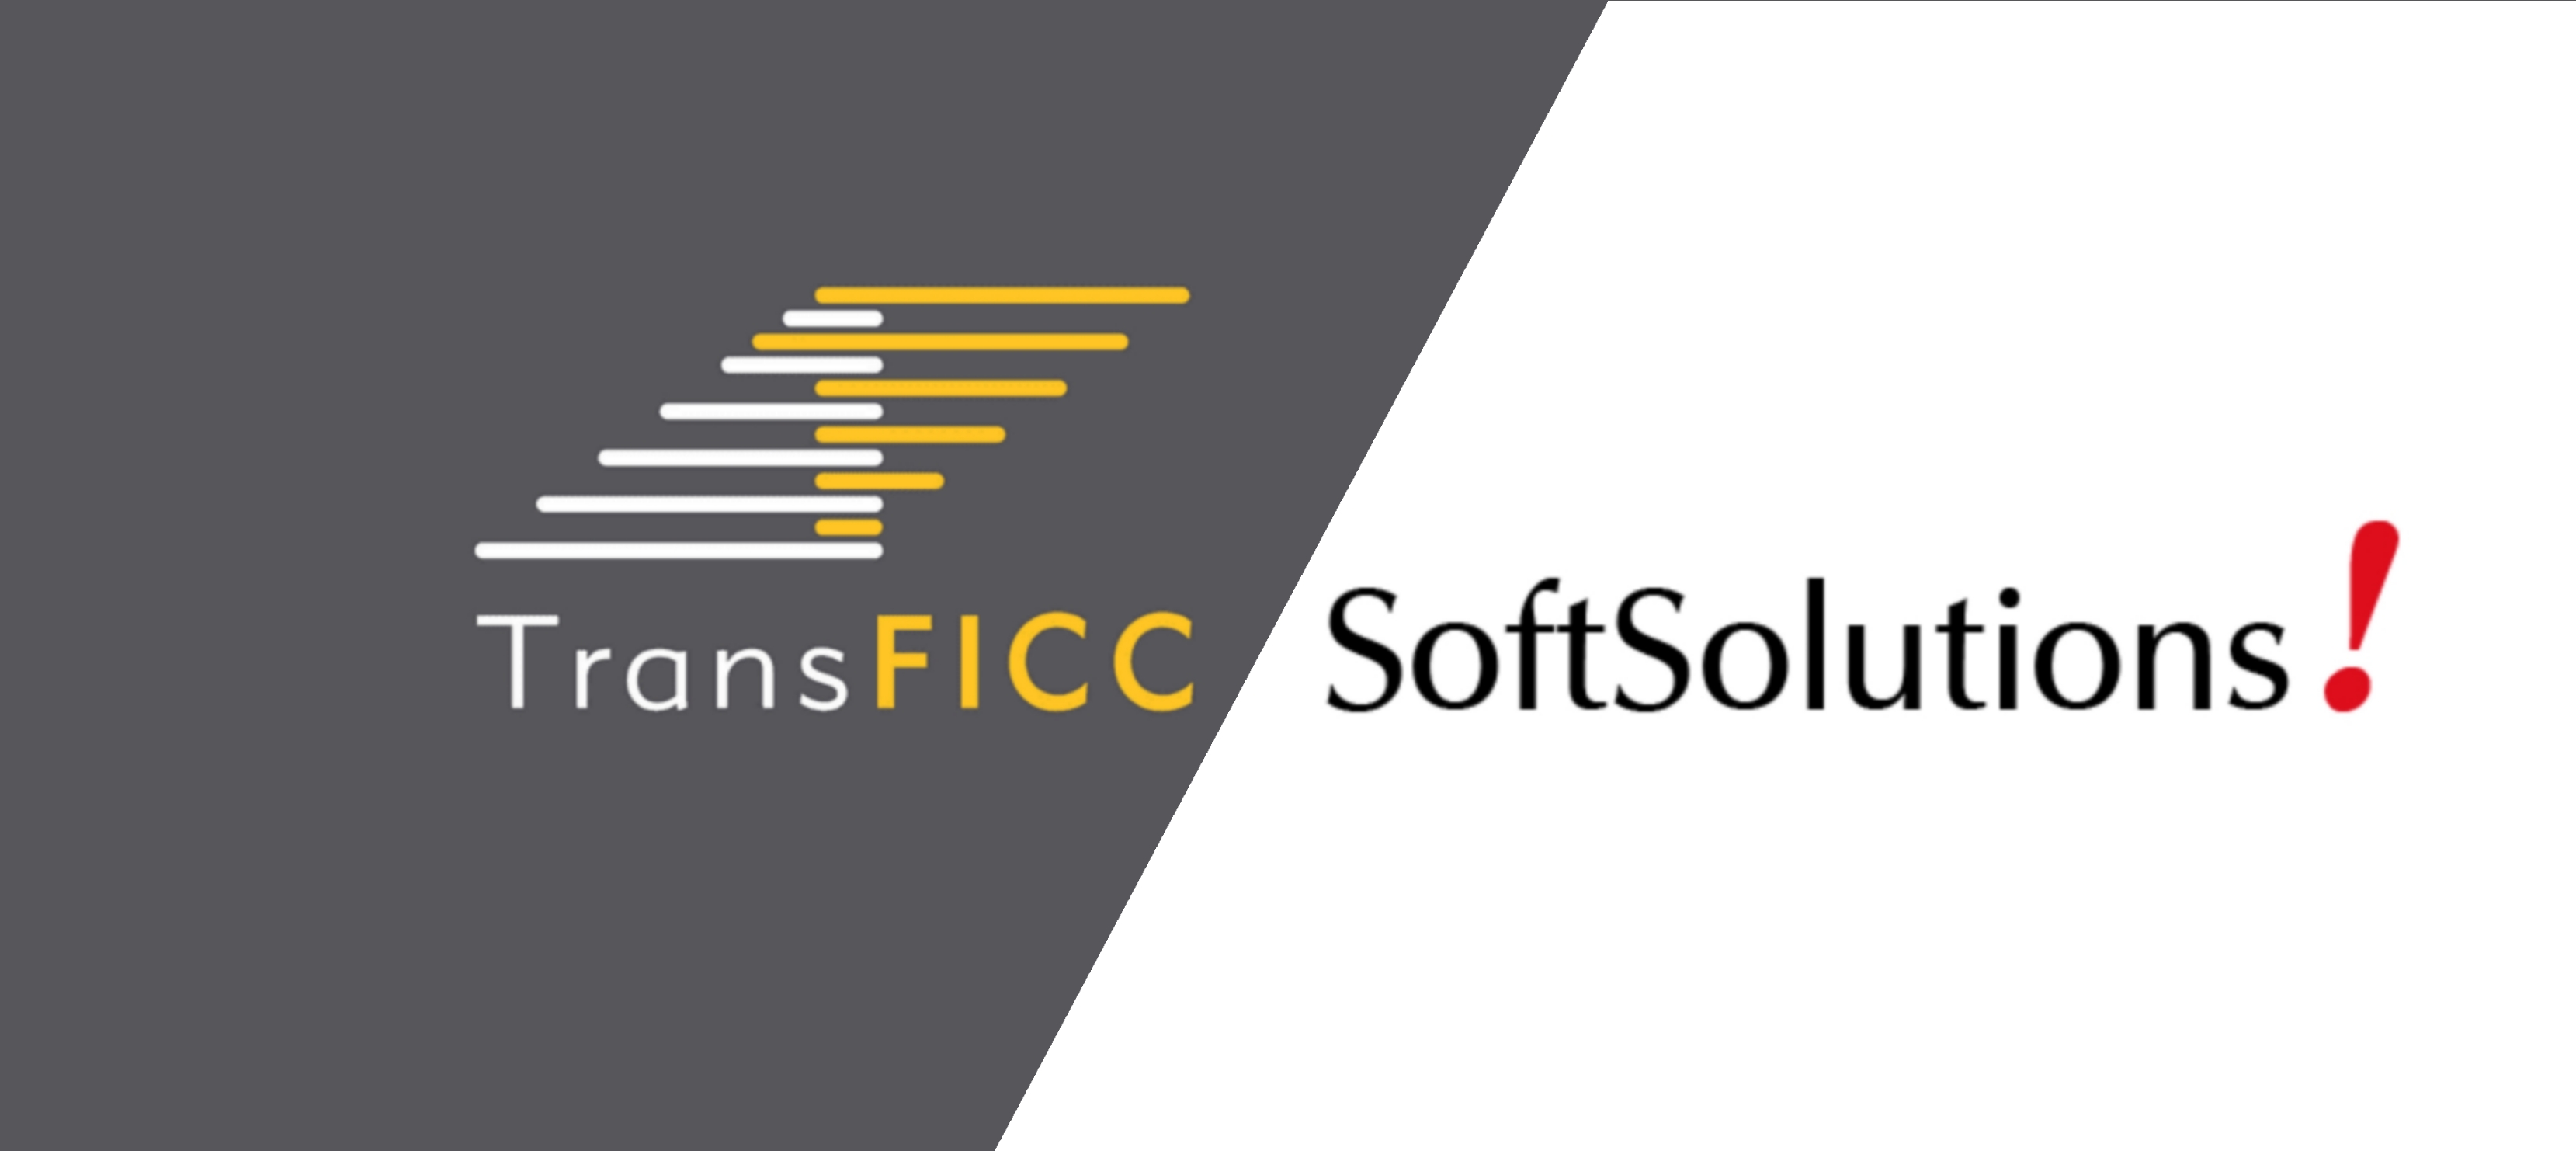 SoftSolutions! and TransFICC Partner to Provide Cloud Hosted Trading and Connectivity